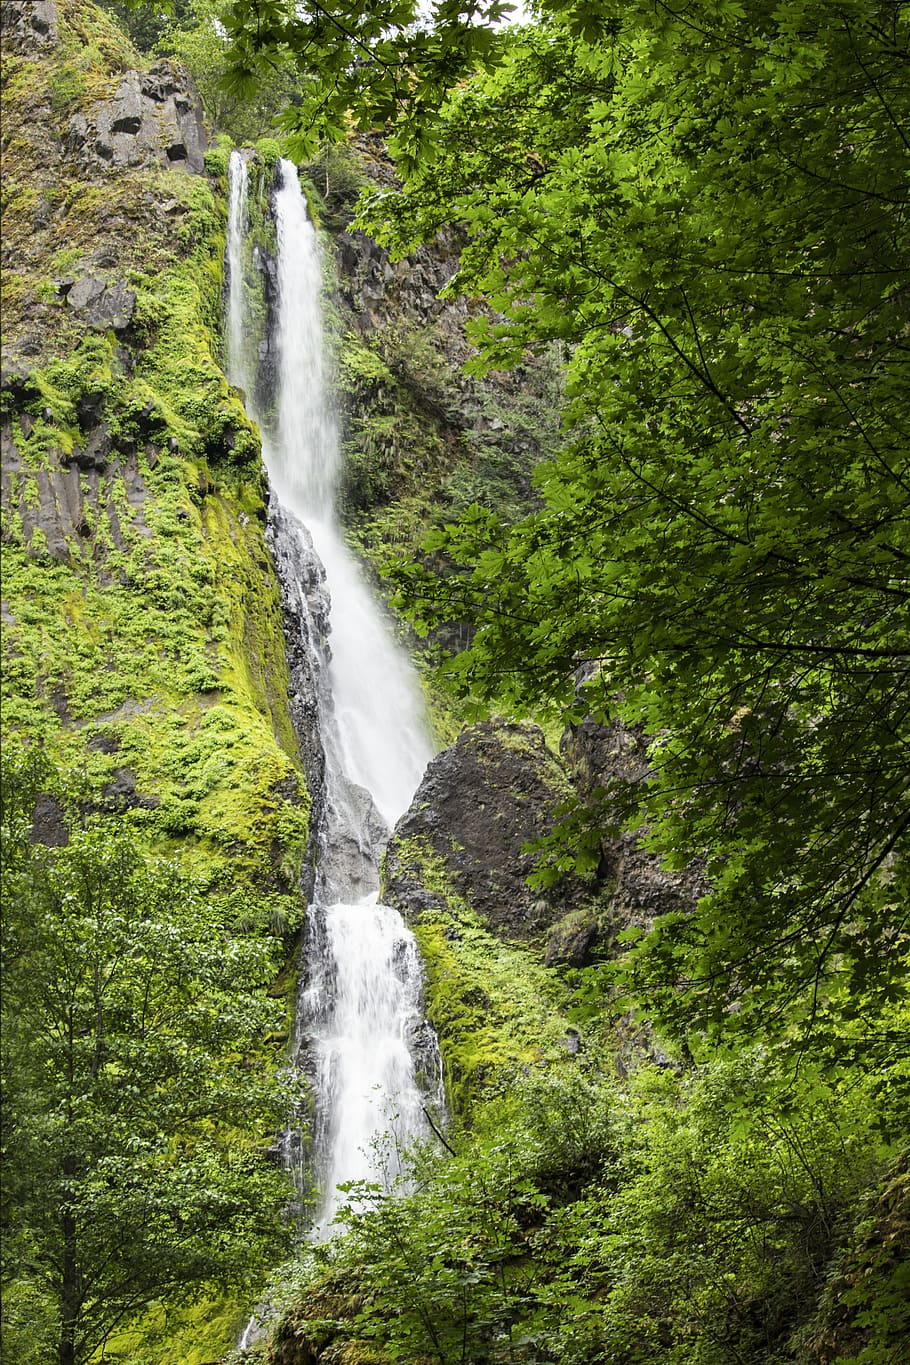 Starvation Creek, Falls, Oregon, green trees and waterfalls, waterfall, water, tree, long exposure, forest, scenics - nature